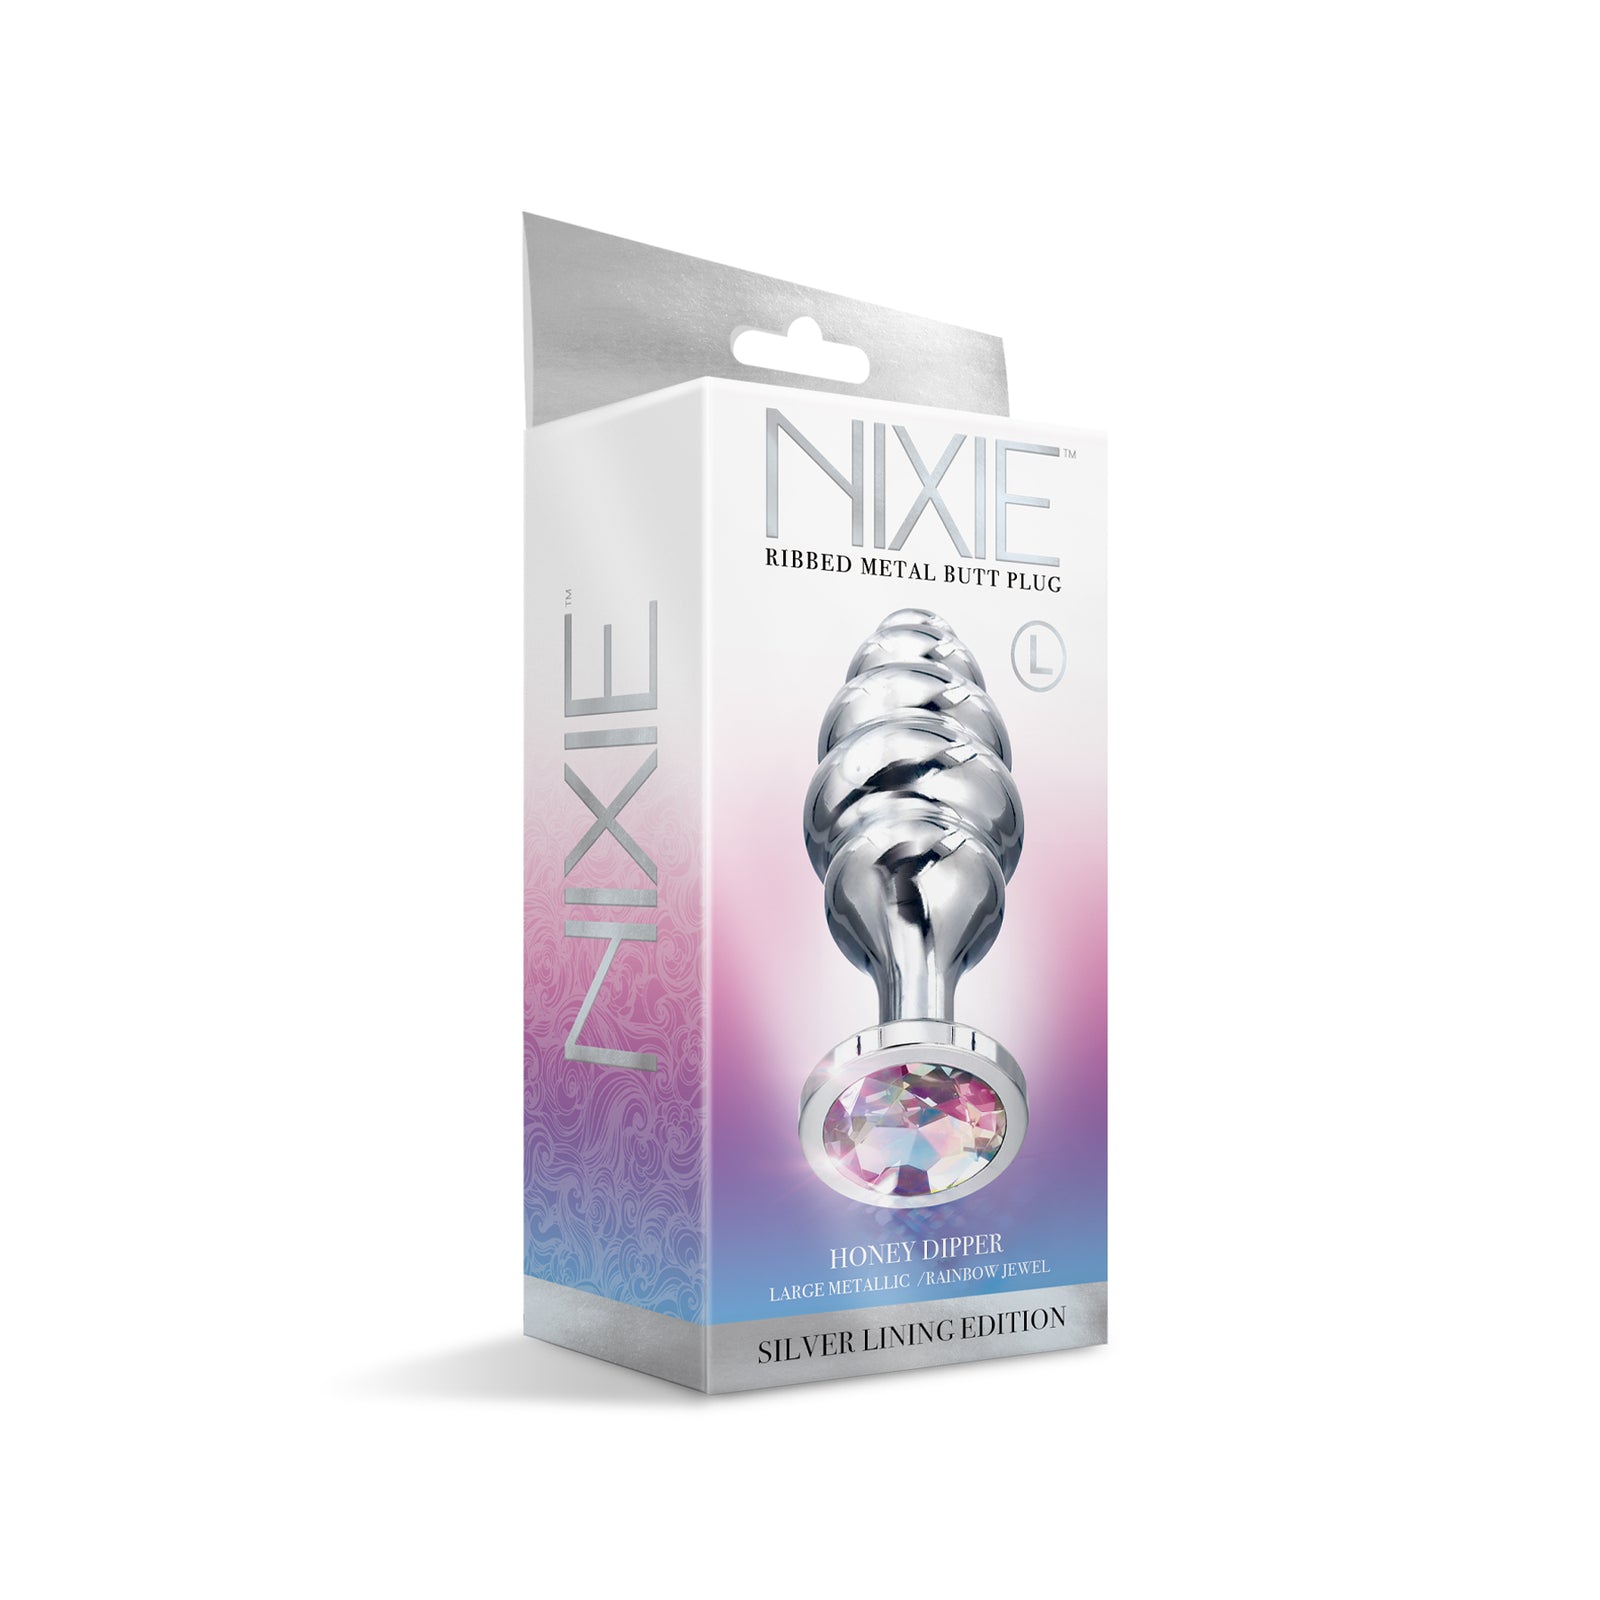 NIXIE Ribbed Metal Butt Plug, Honey Dipper, Large - THES